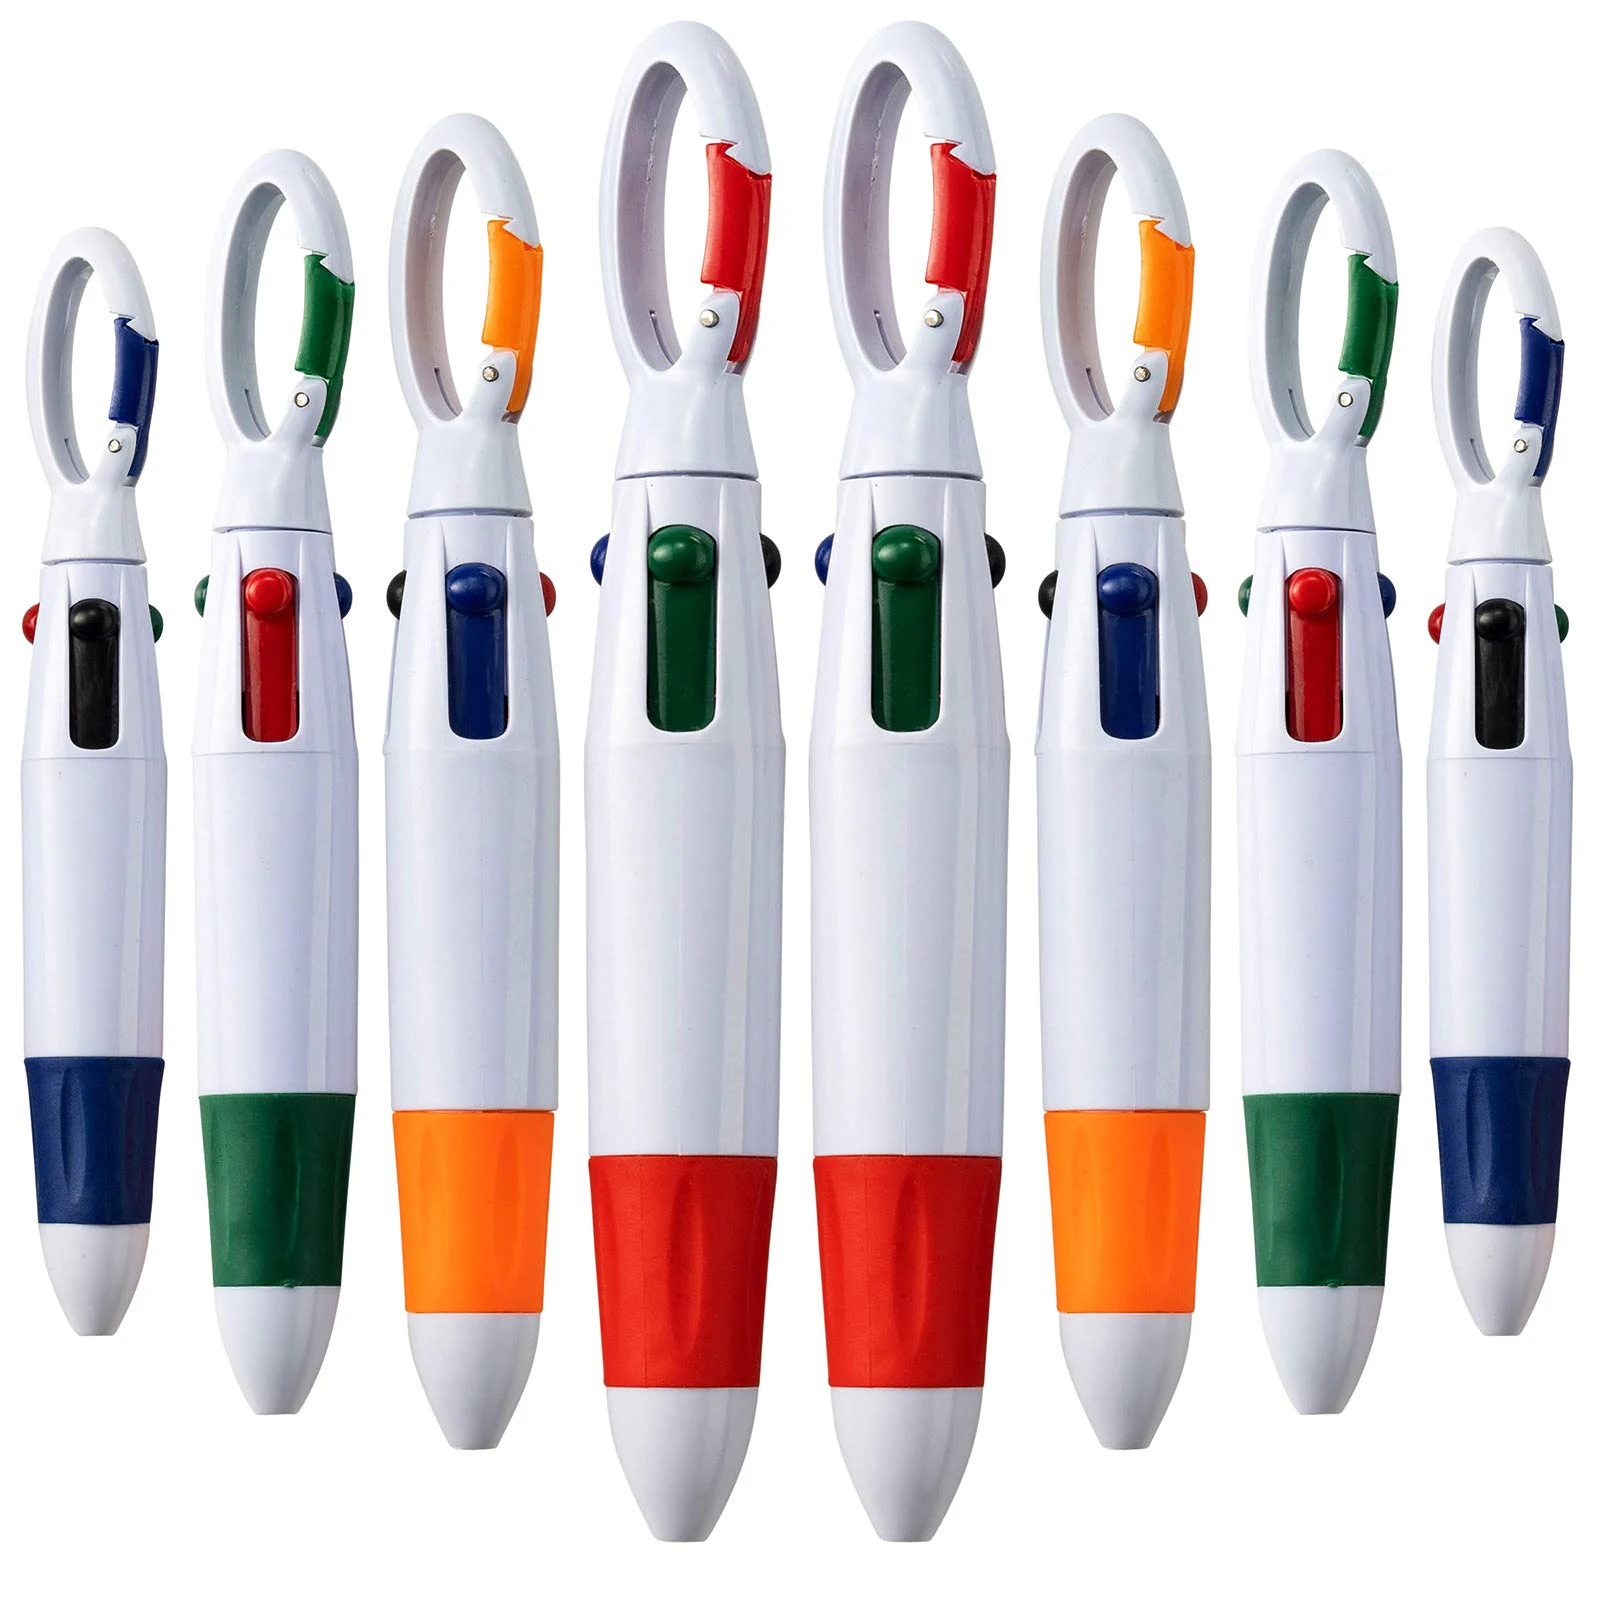 

7PCS Multi color leather case 4-color mountaineering buckle plastic multi-color ball point pen frosted neutral water pen